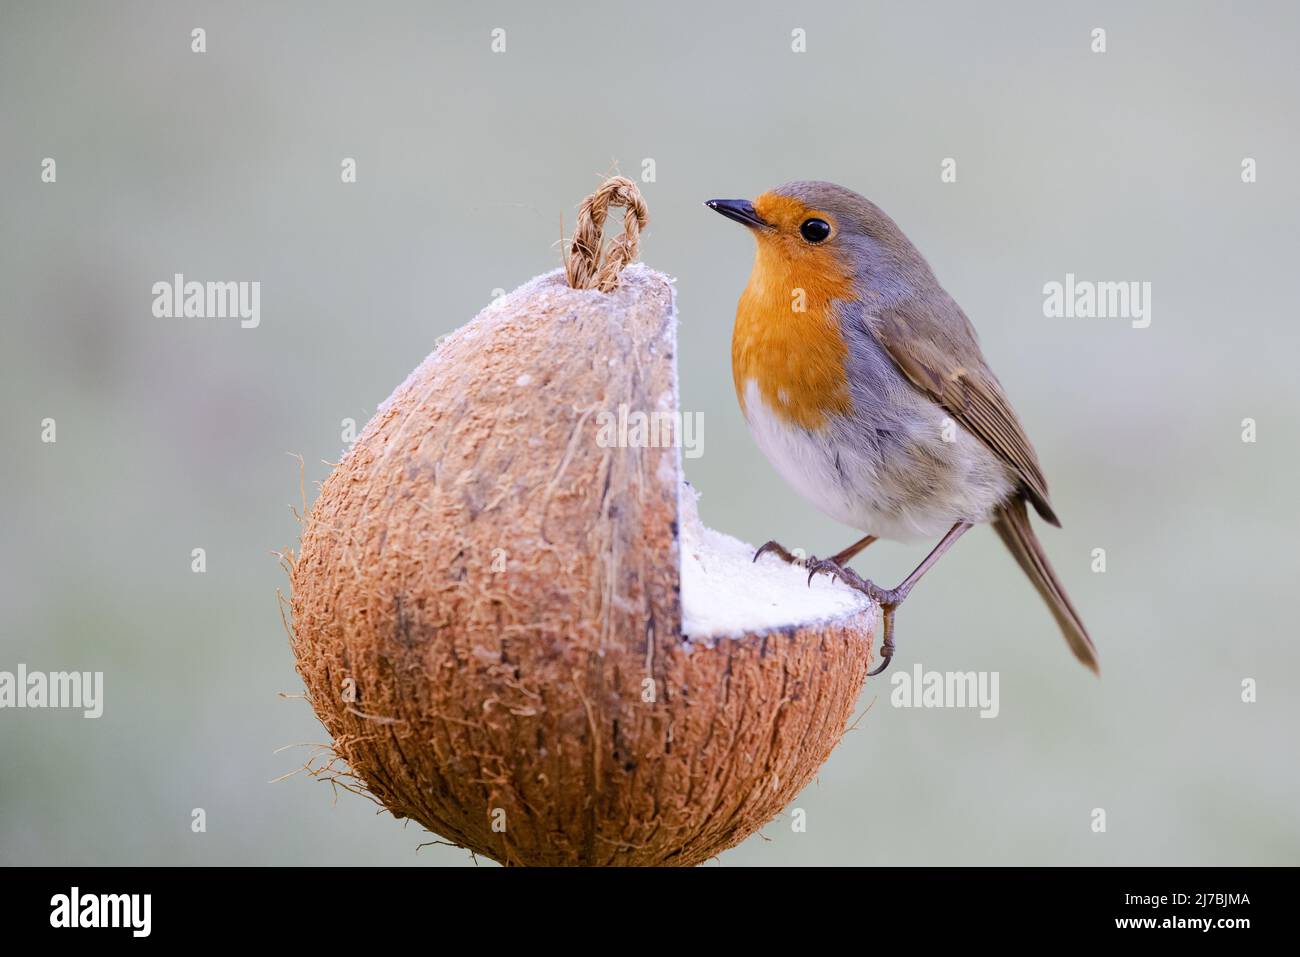 Robin [ Erithacus rubecula ] feeding from seed filled coconut shell Stock Photo